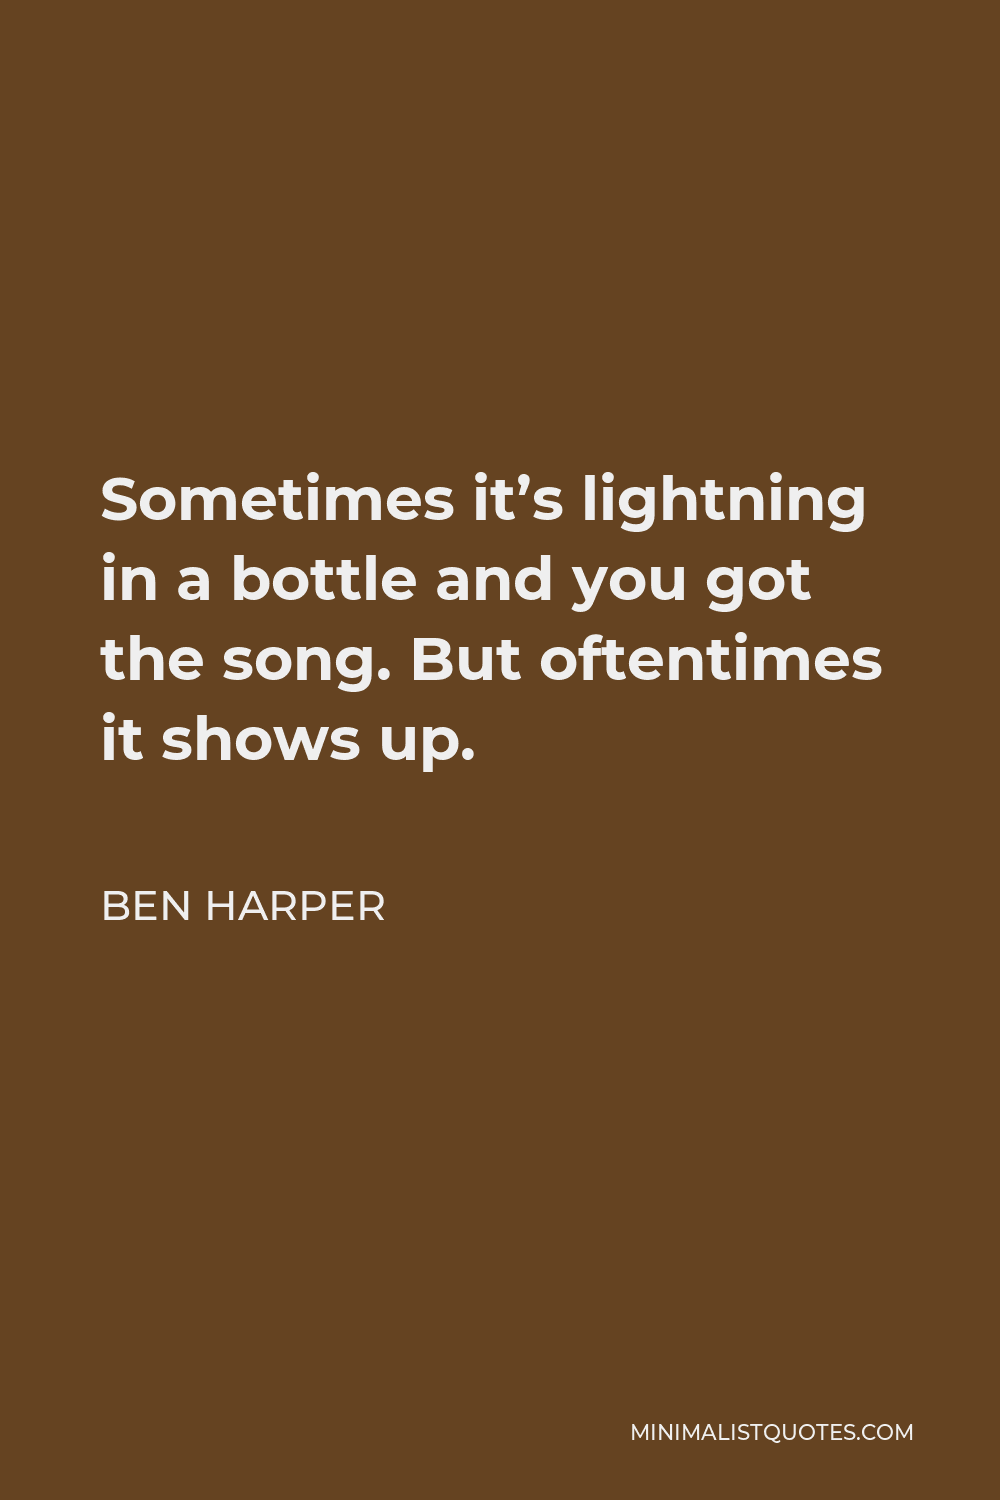 Ben Harper Quote - Sometimes it’s lightning in a bottle and you got the song. But oftentimes it shows up.